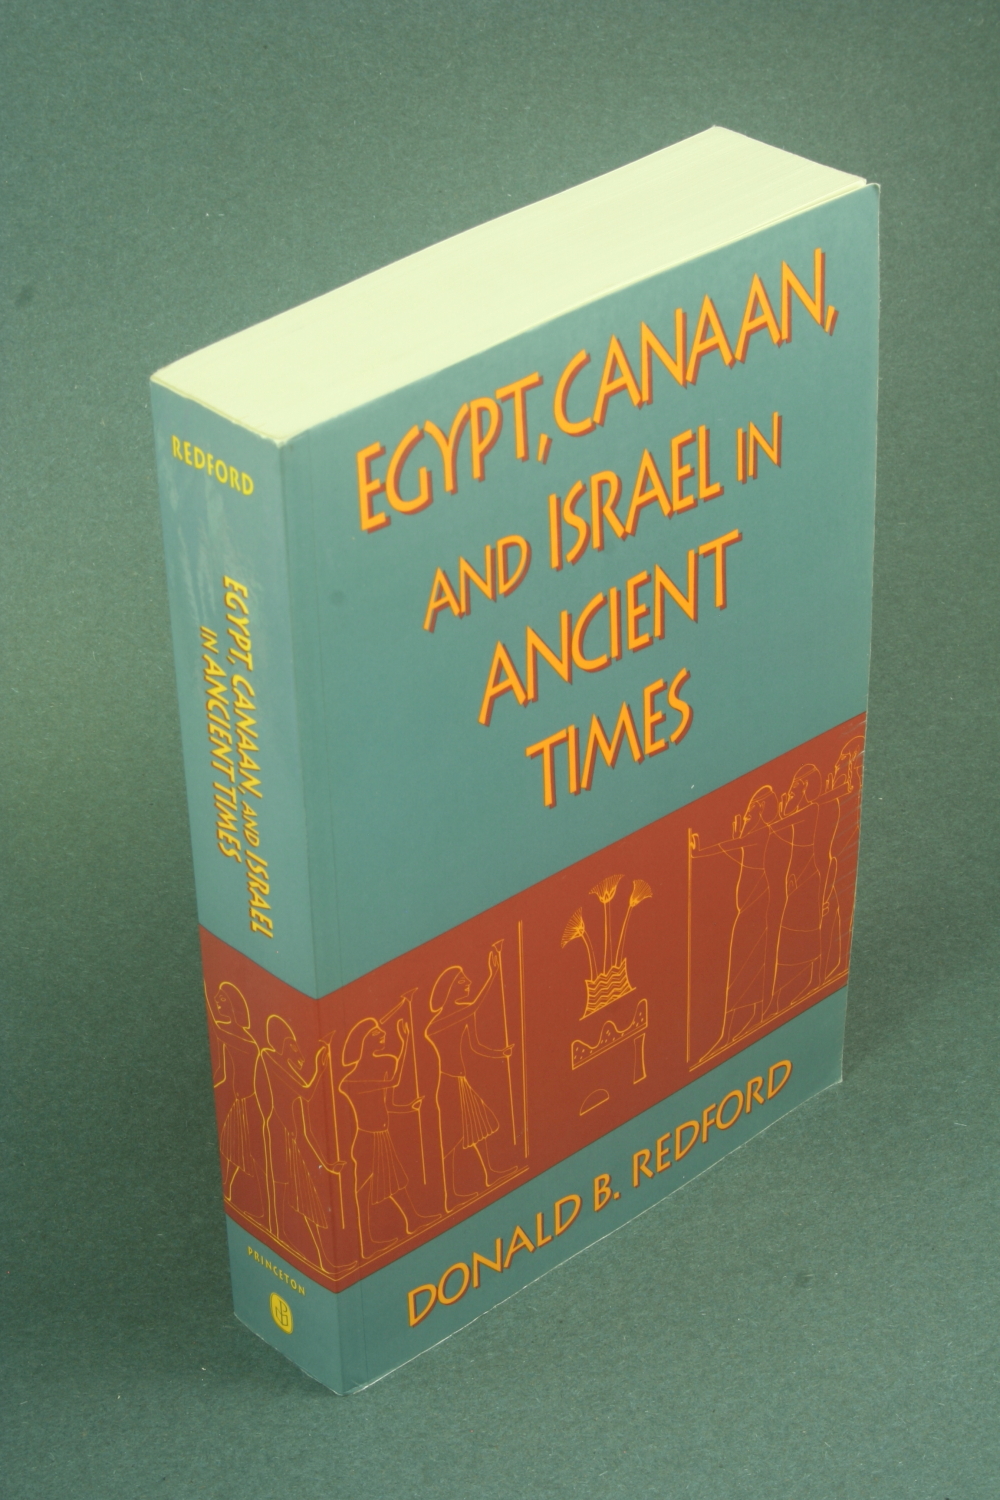 Egypt, Canaan, and Israel in Ancient Times. - Redford, Donald B.